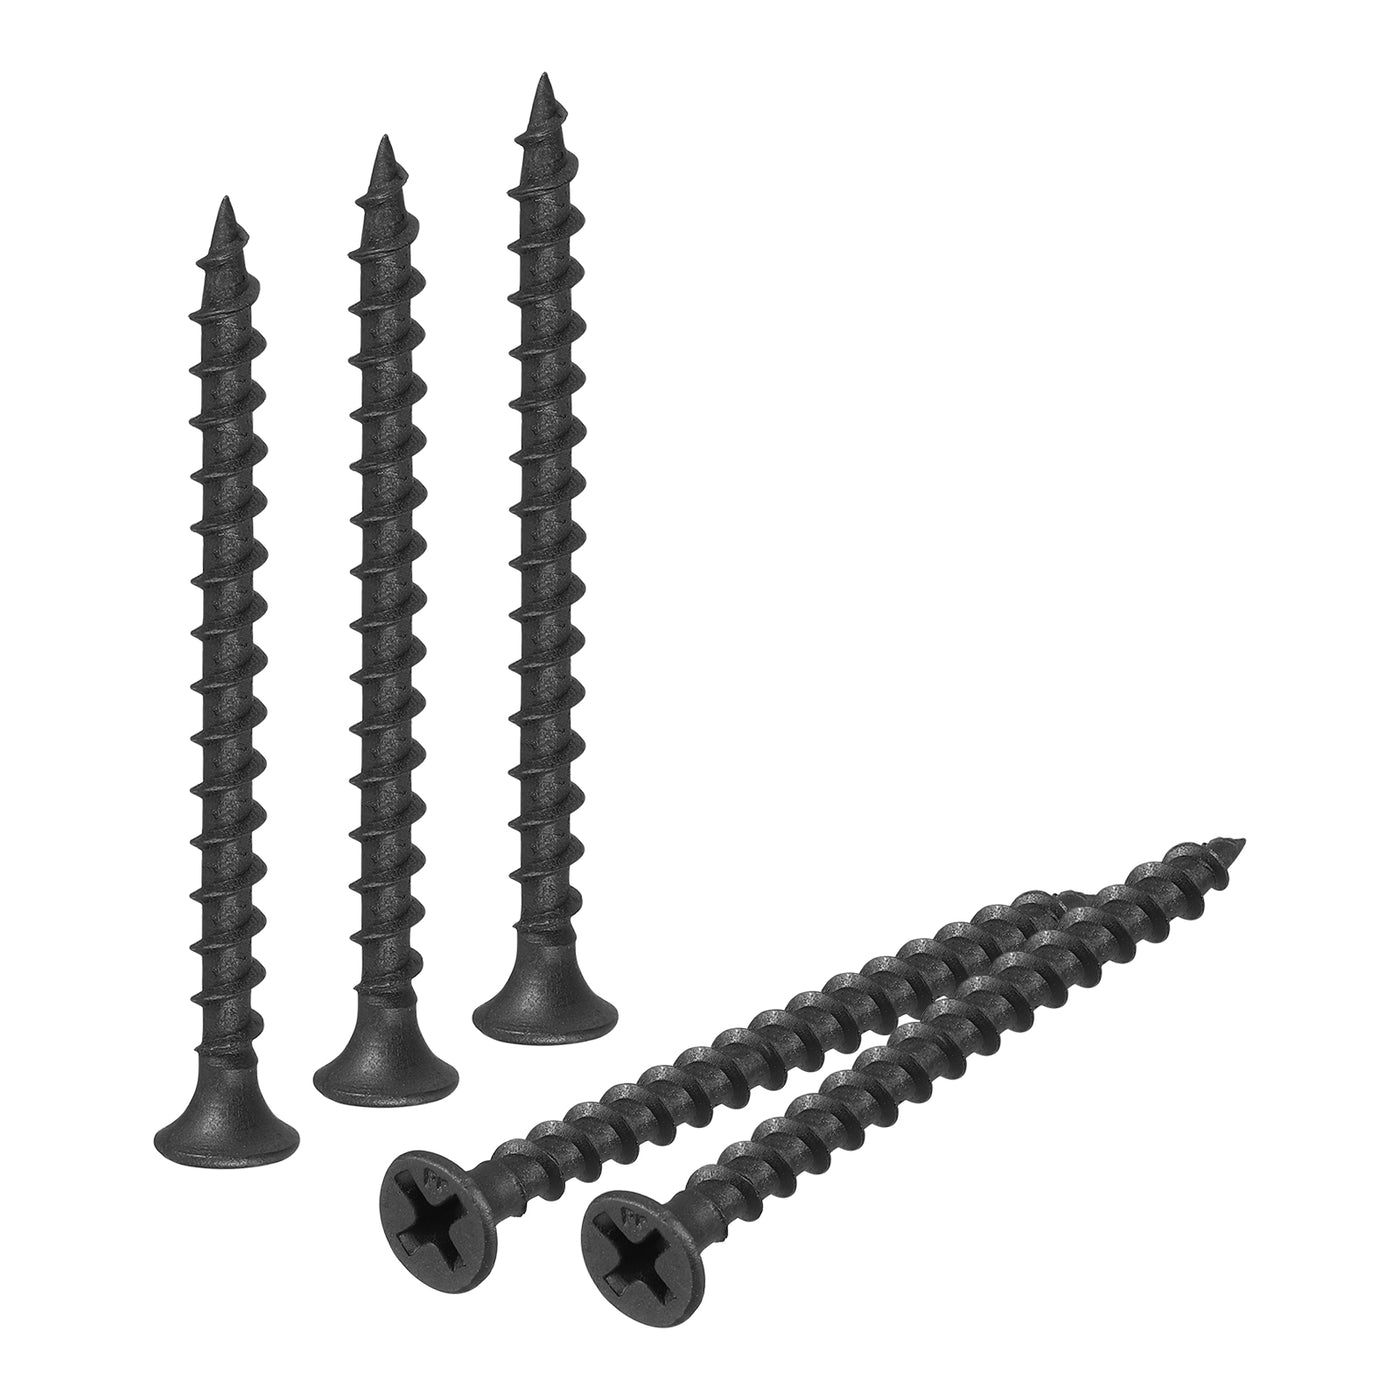 uxcell Uxcell M3.8x50mm 50pcs Phillips Drive Wood Screws, Carbon Steel Self Tapping Screws